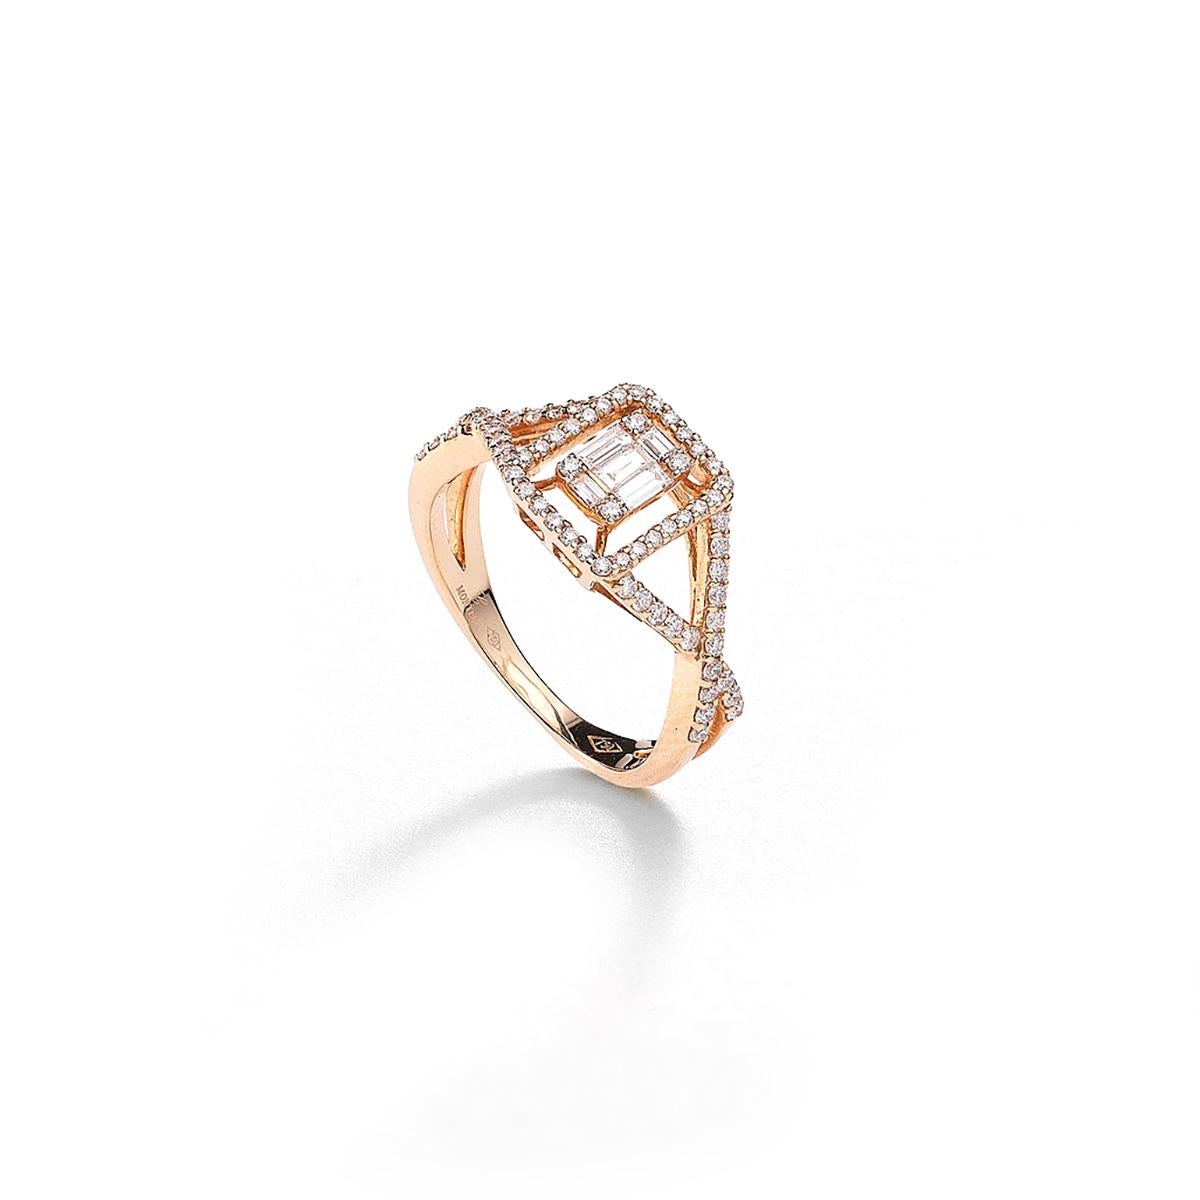 Ring in 18kt pink gold set with 5 baguette cut diamonds 0.15 cts and 68 diamonds 0.39 cts Size 54  